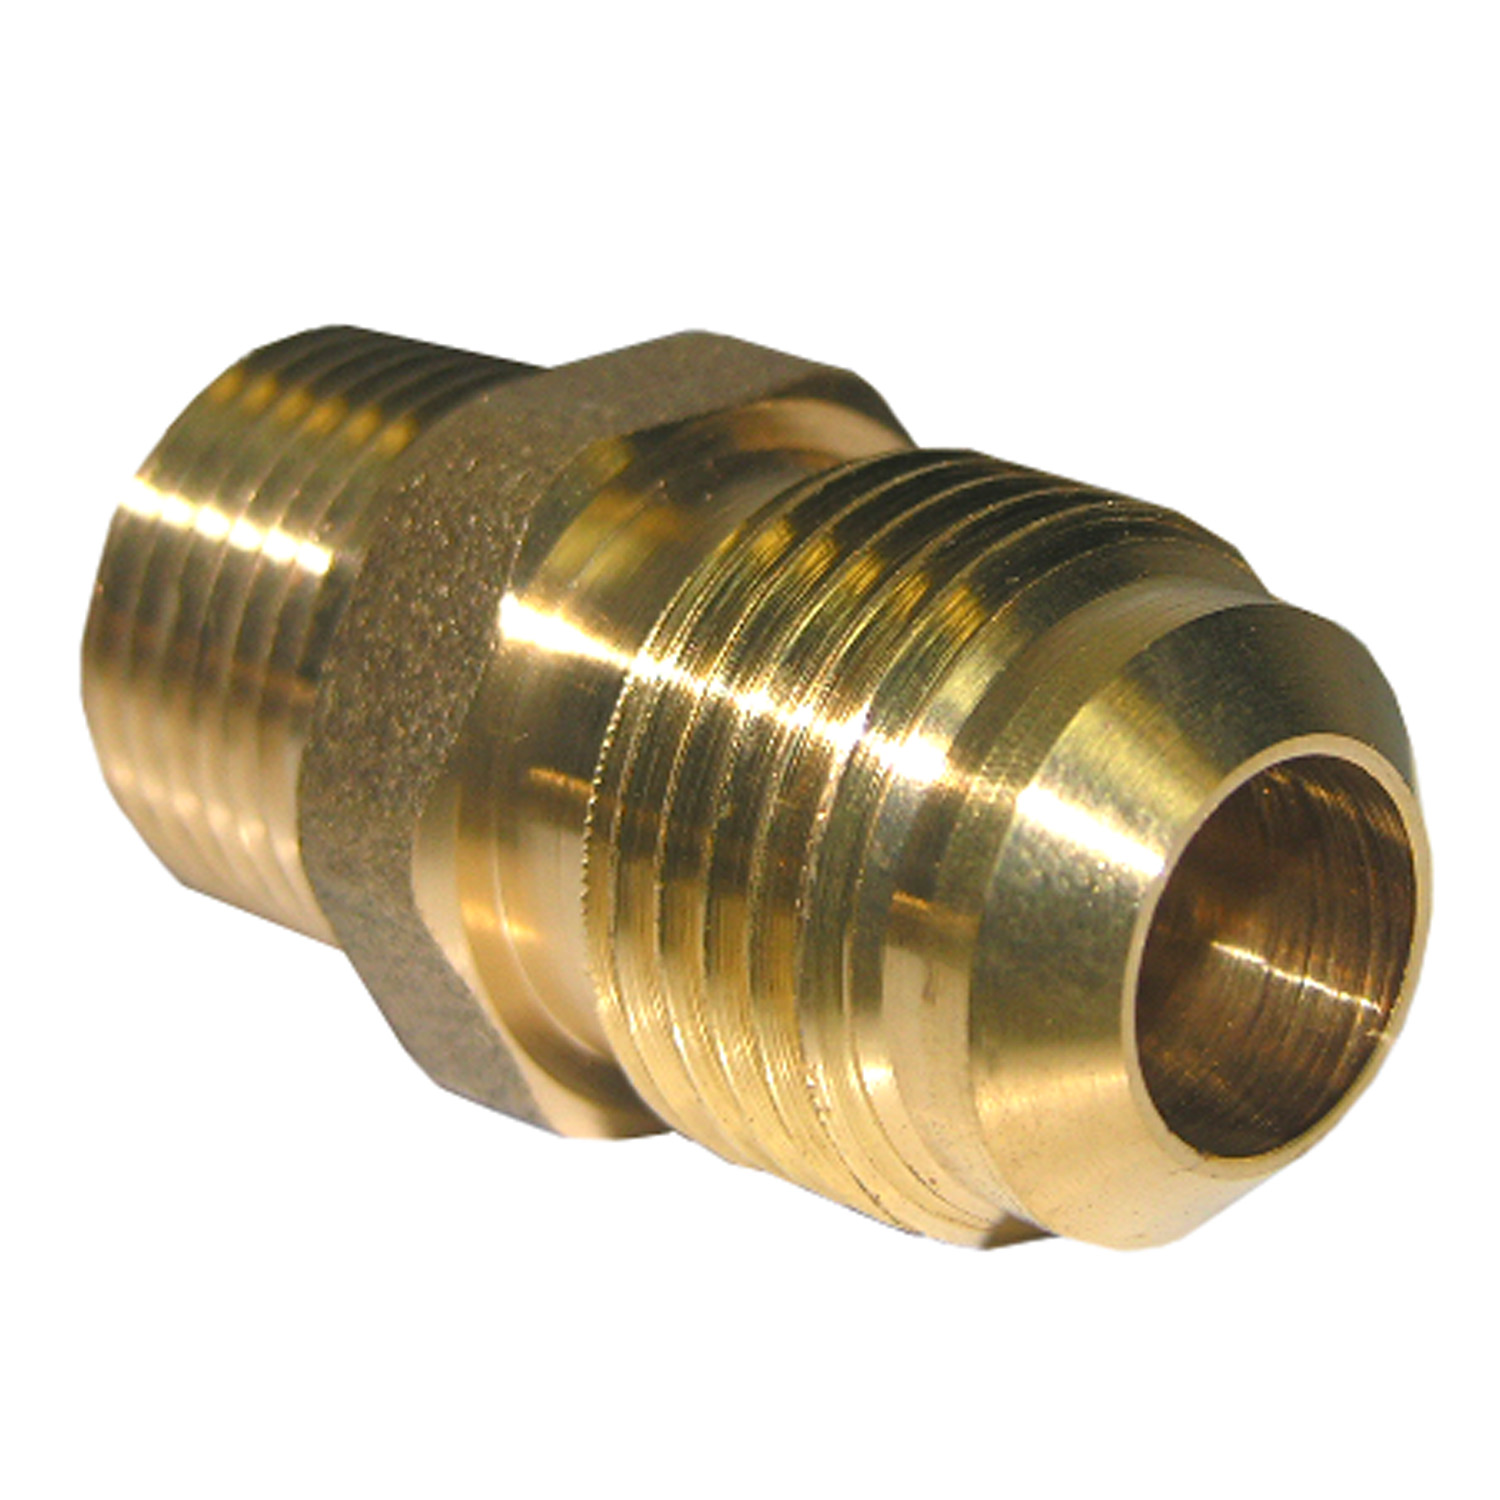 17-4847 Pipe Adapter, 1/2 x 3/8 in, Male Flare x MPT, Brass, 700 psi Pressure